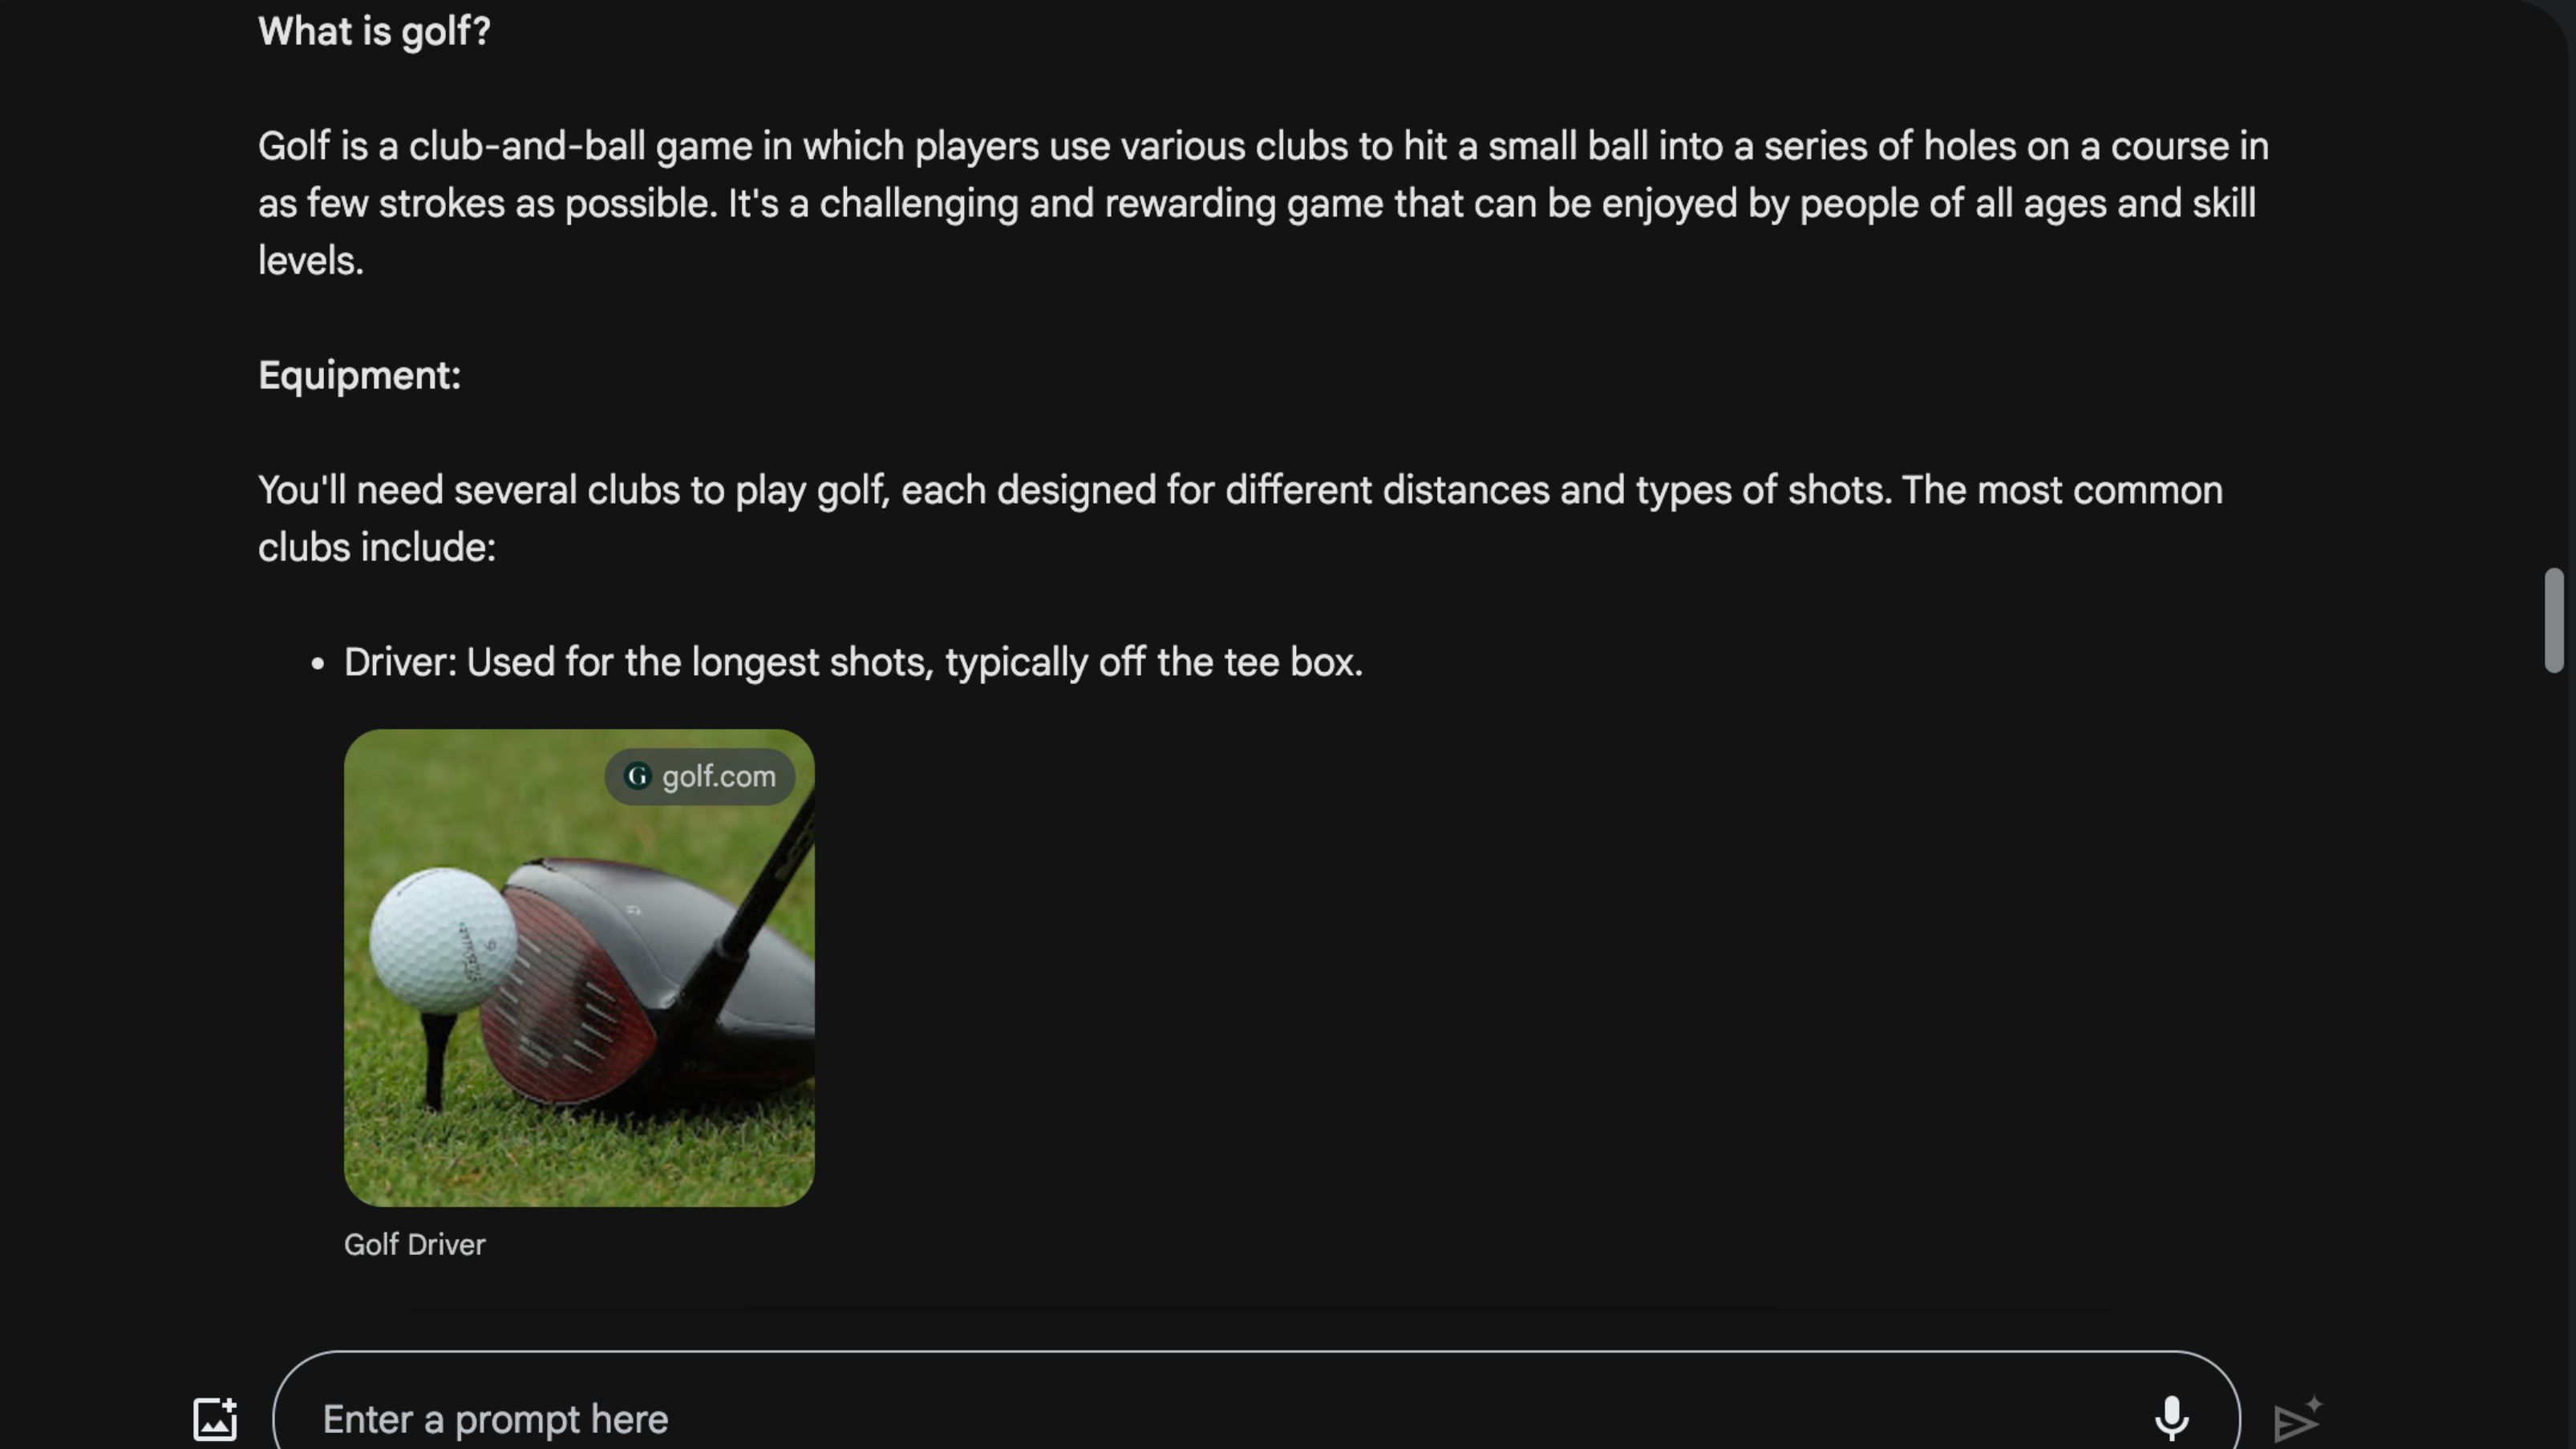 Google Bard answers what is golf